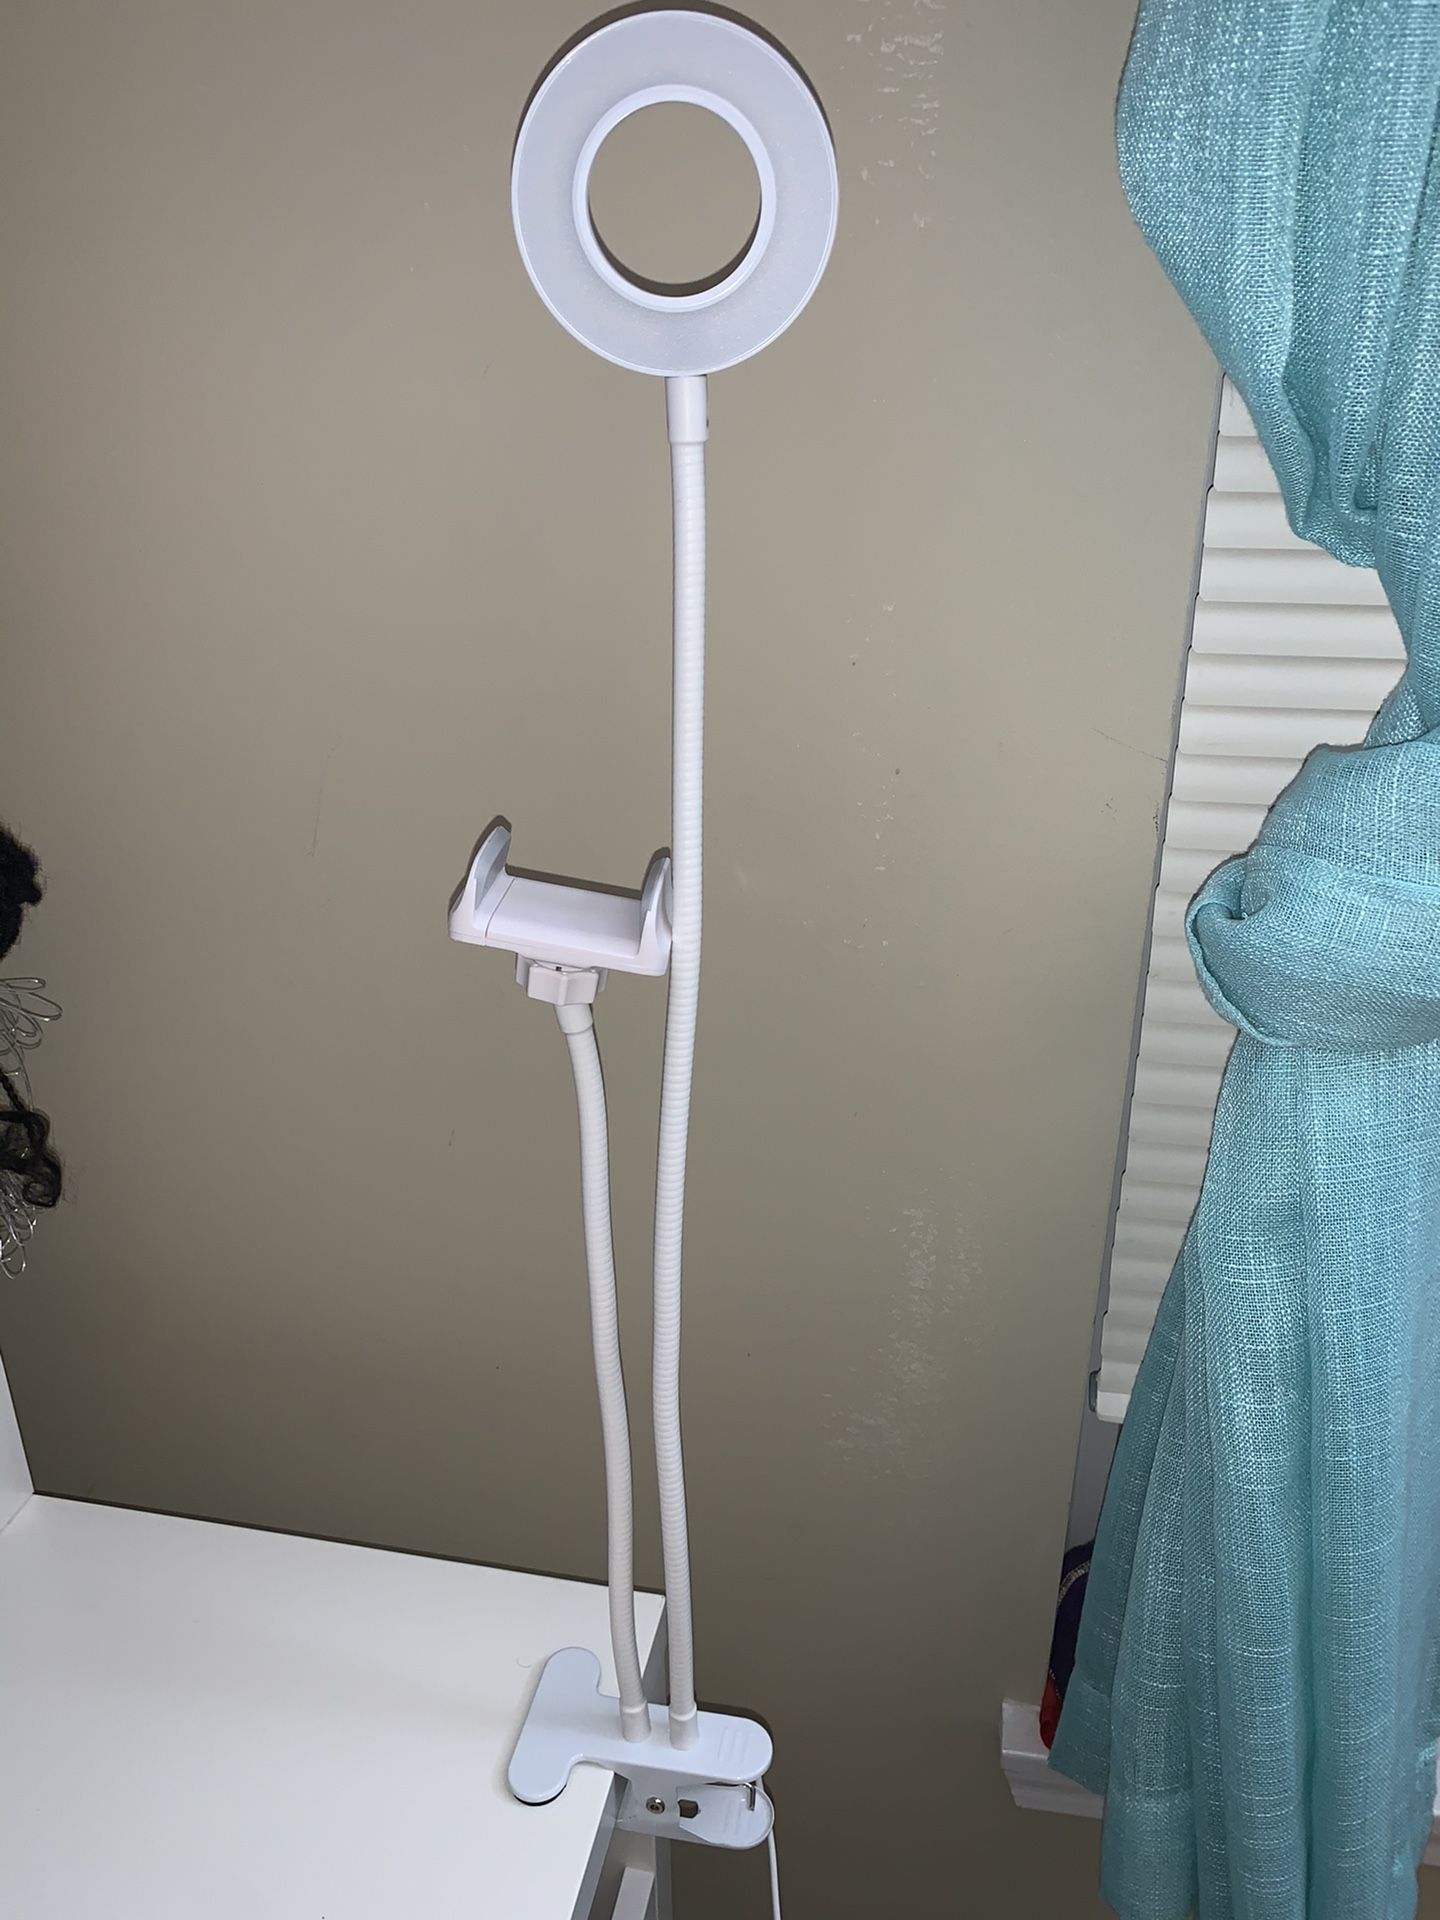 Ring Light With Phone Holder (dimmable).